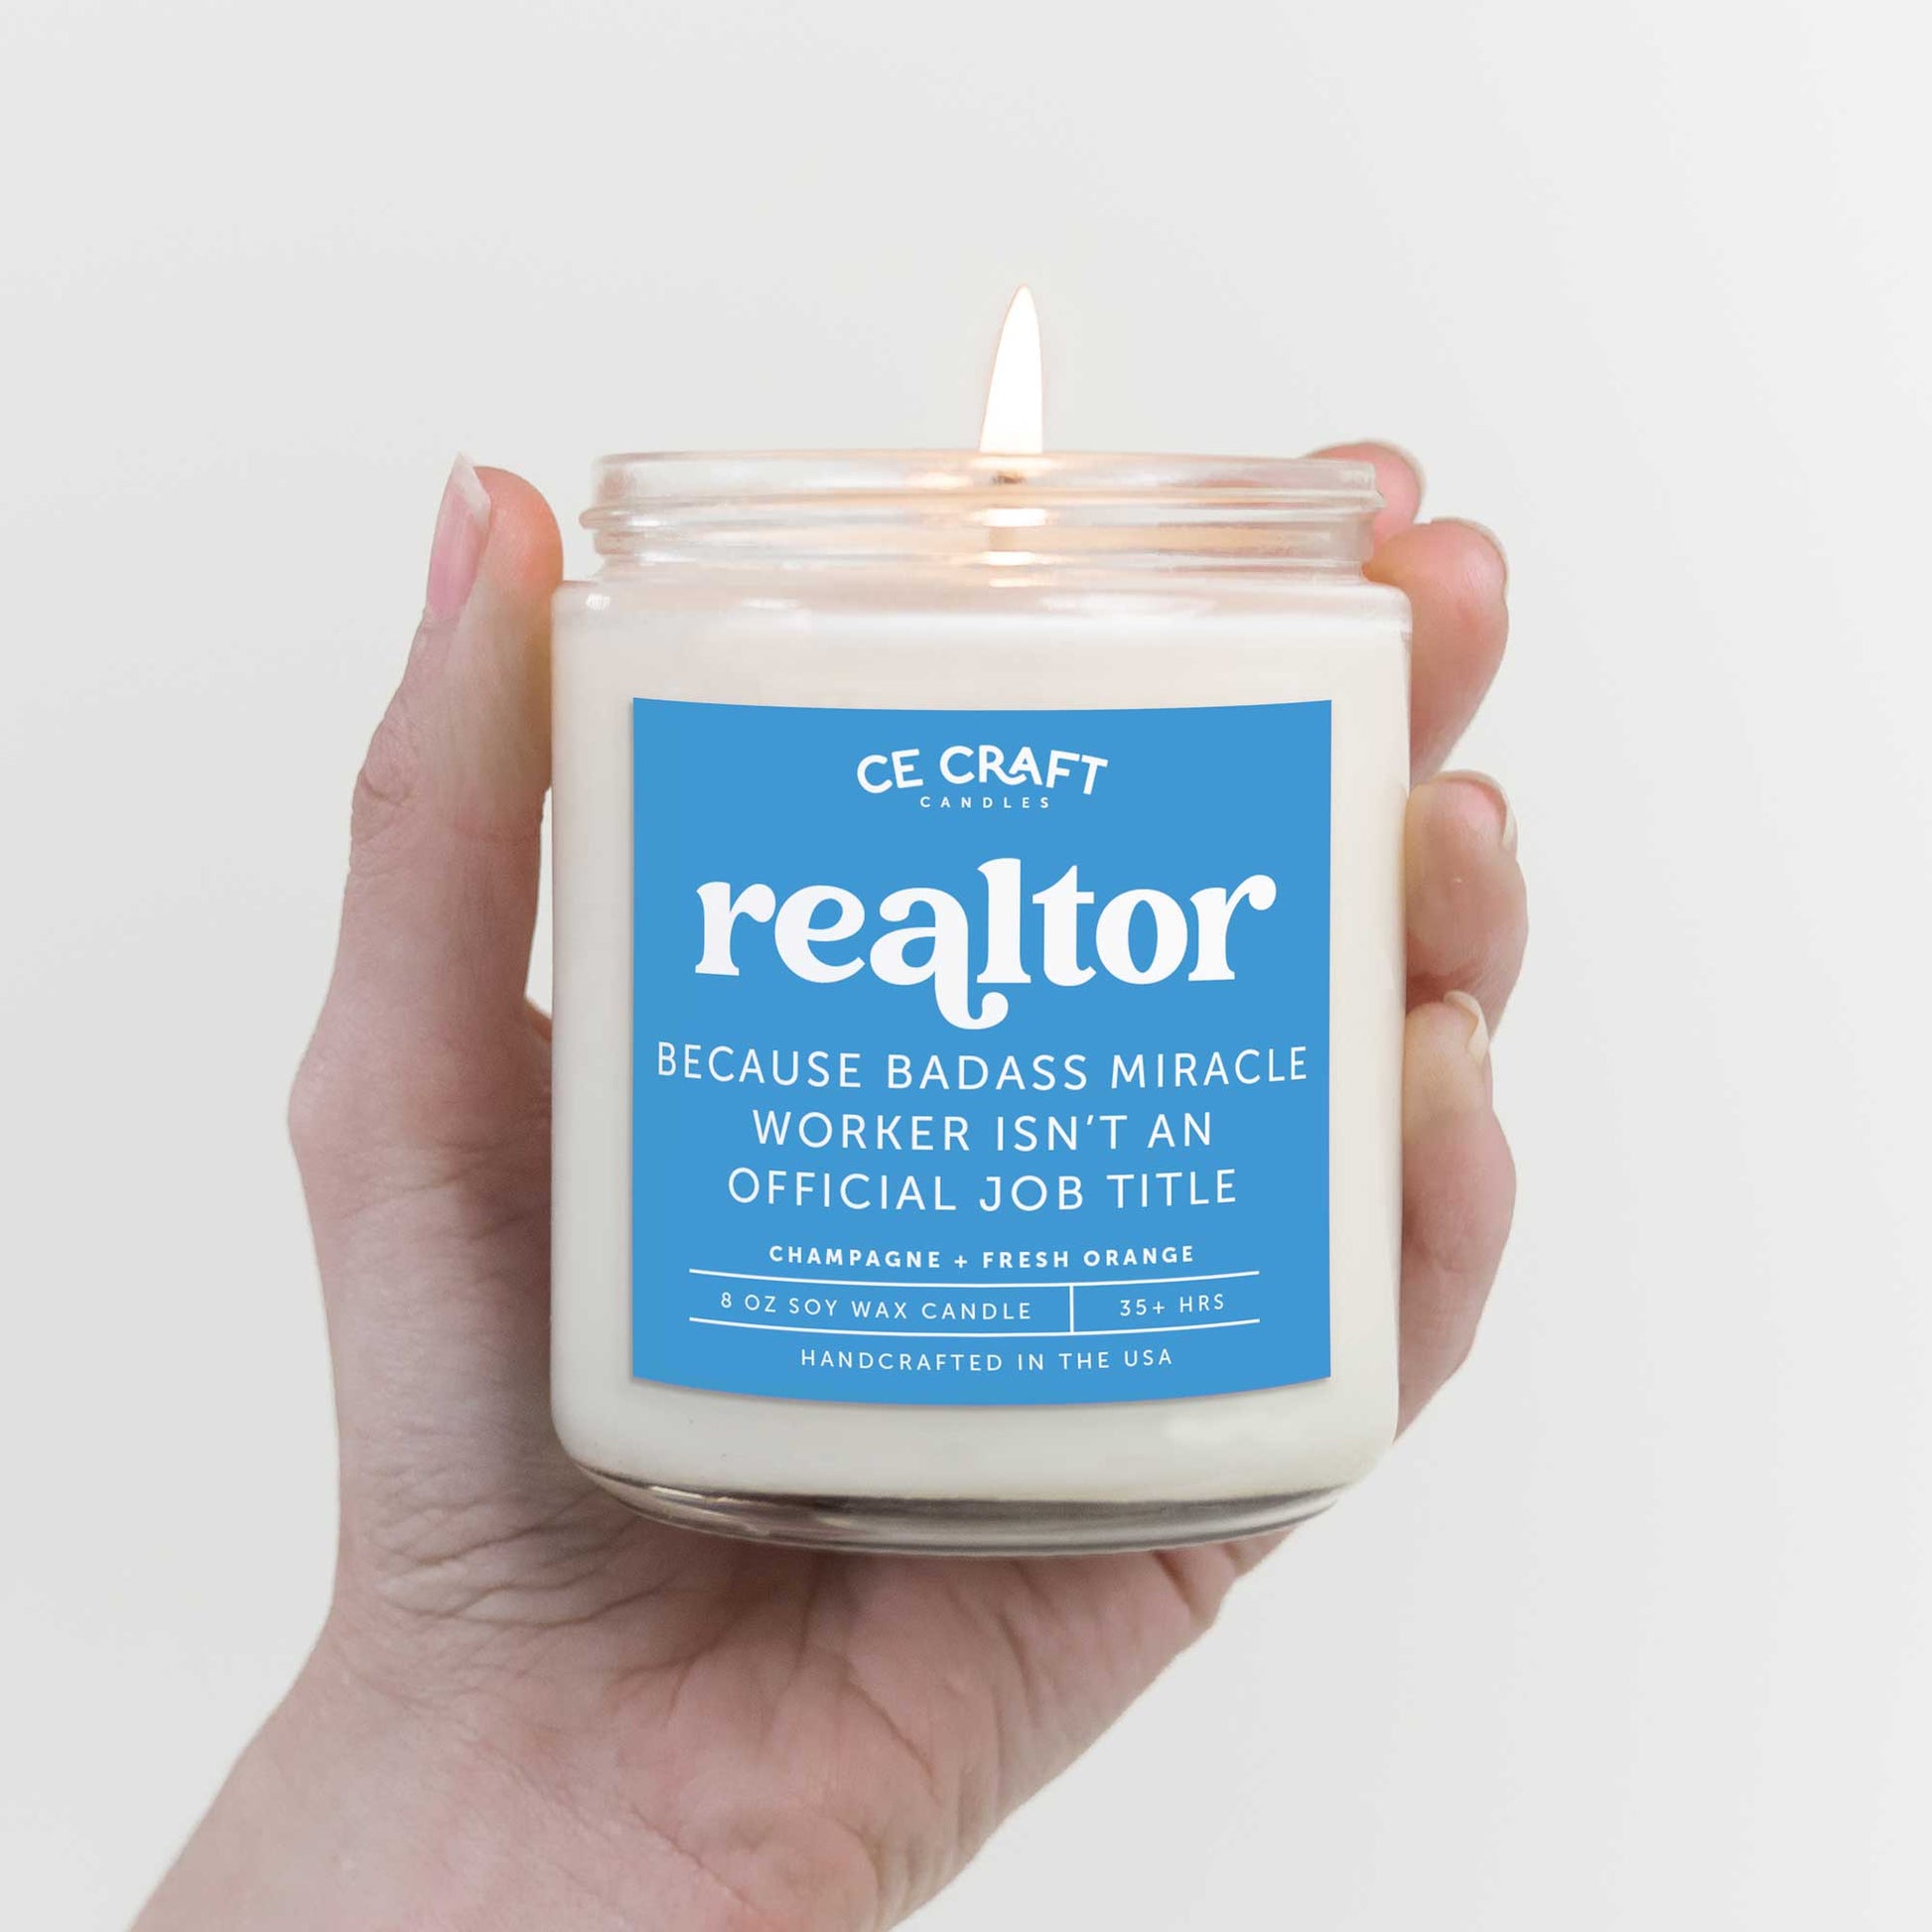 Realtor Because Badass Miracle Worker Isn't an Official Job Title Candle Candles CE Craft 